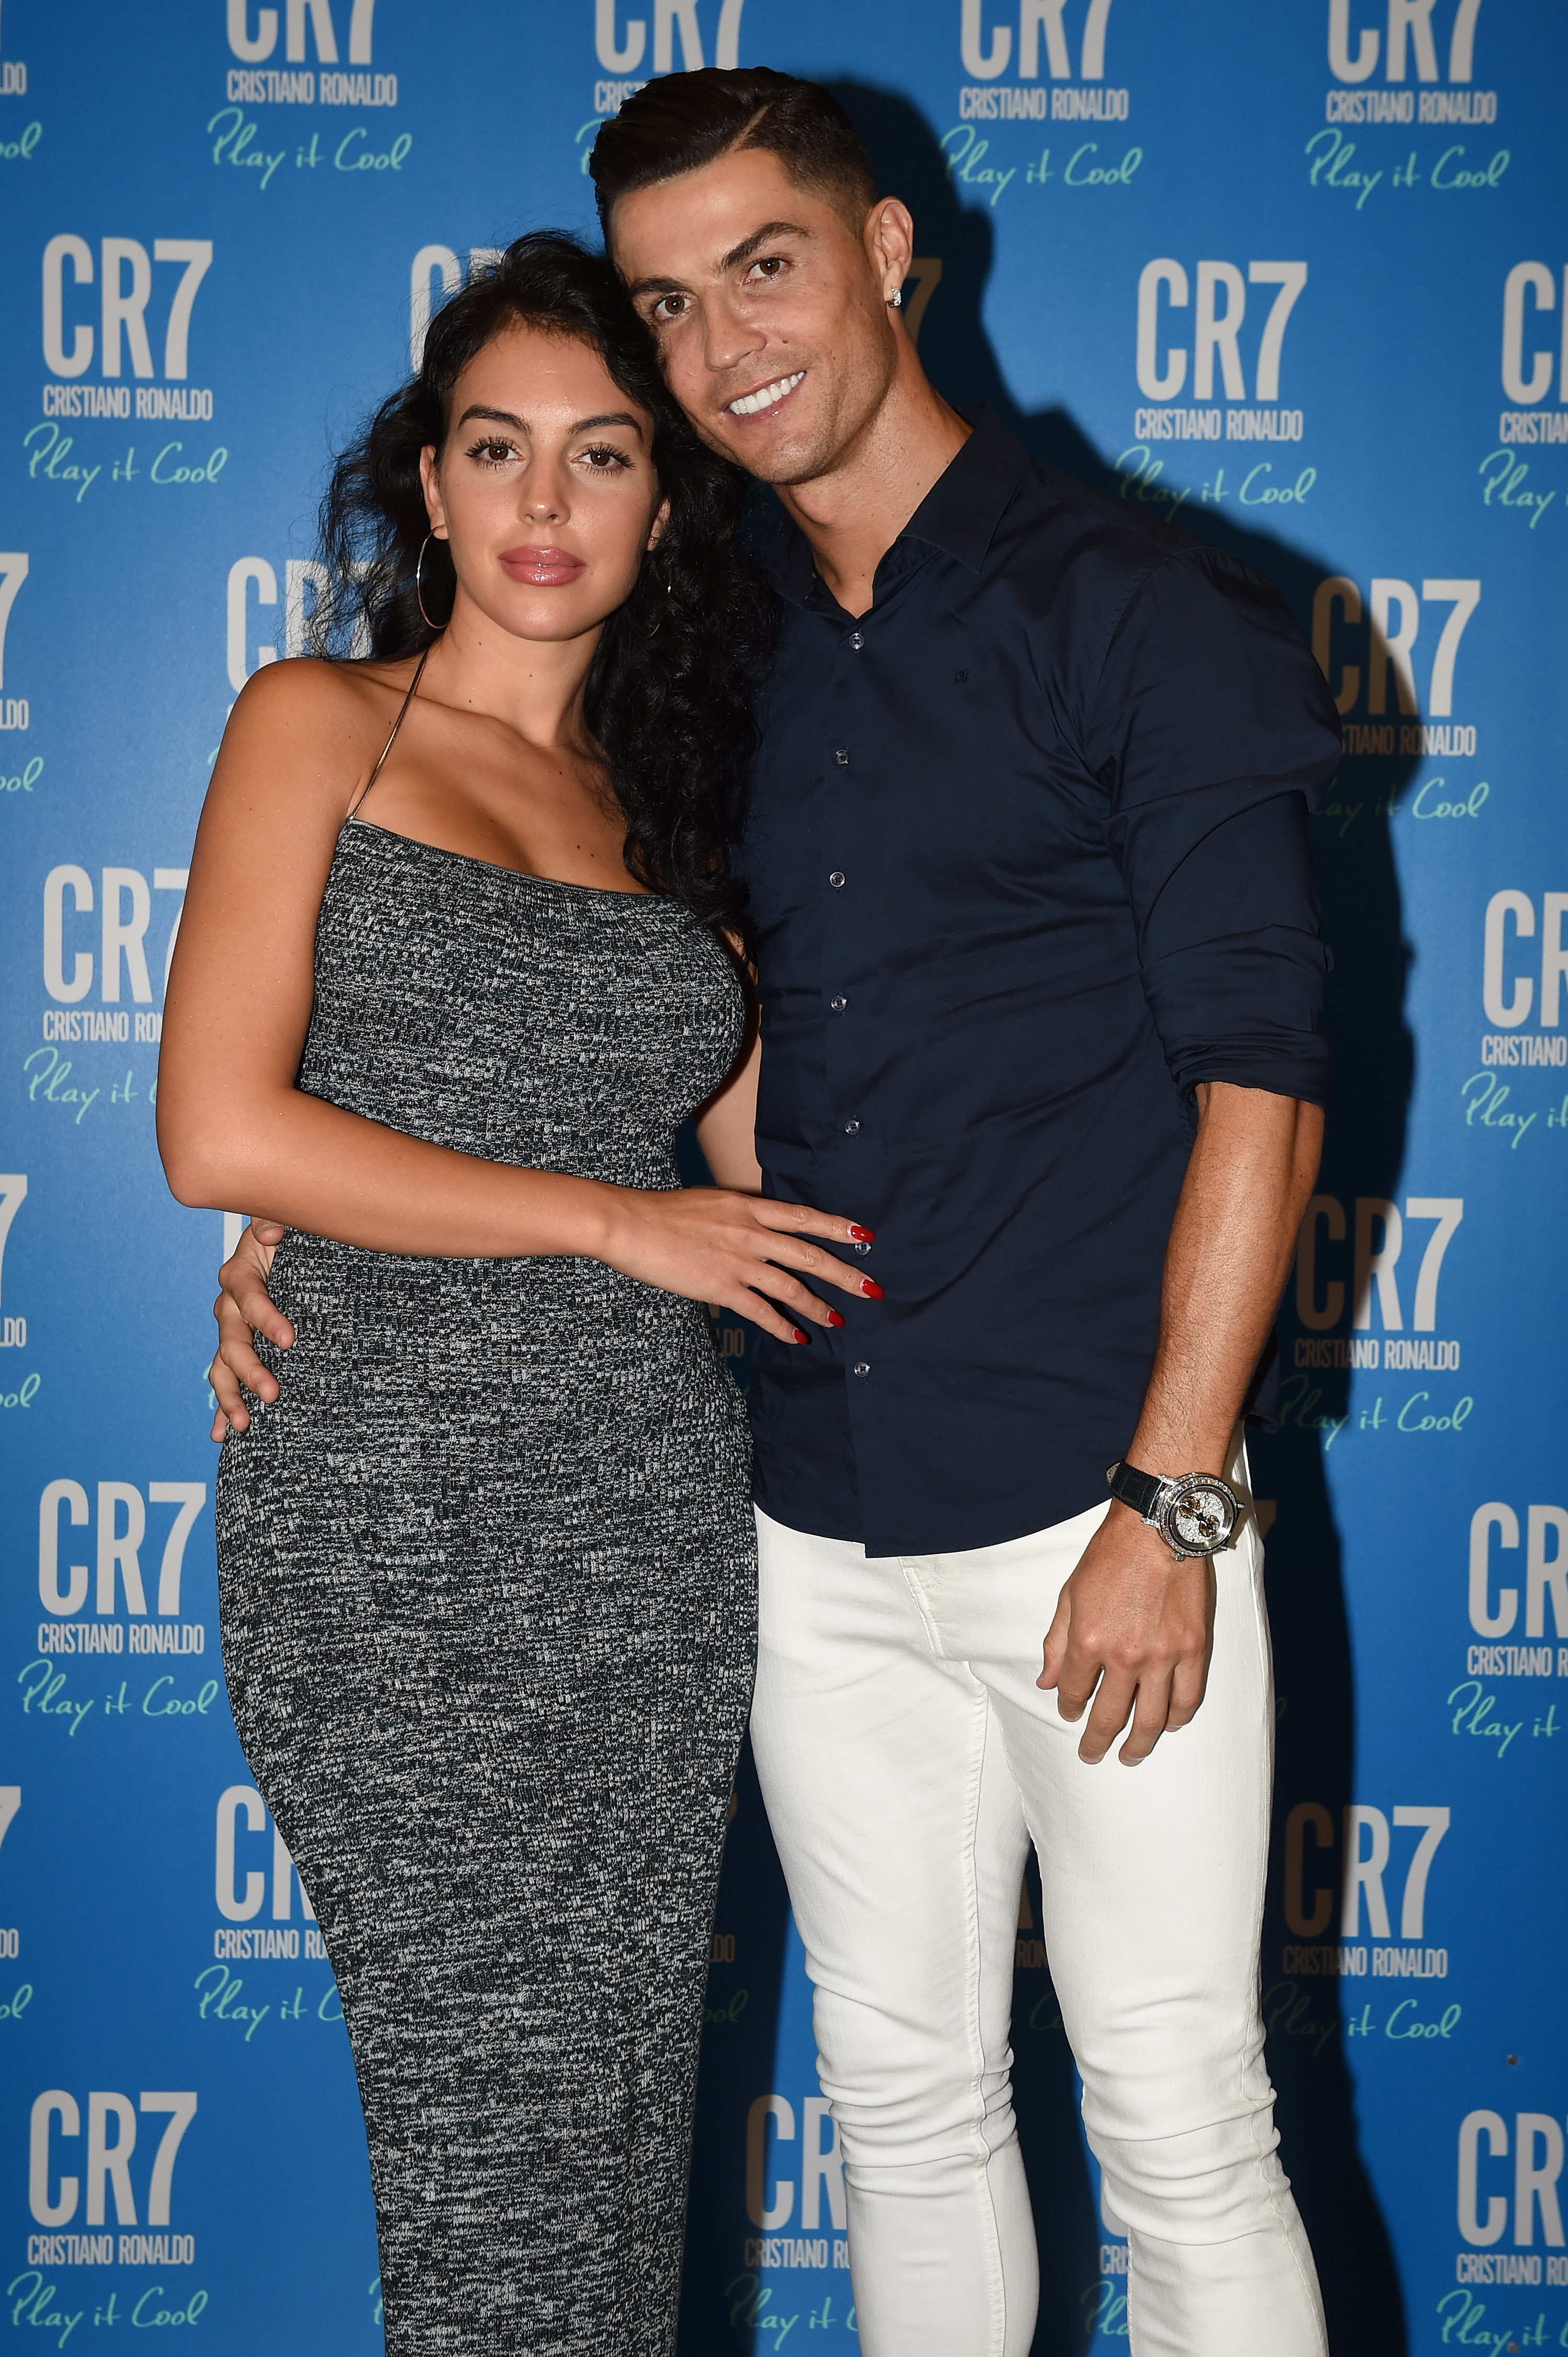 Cristiano Ronaldo and Georgina Rodriguez pose together on red carpet at event in Turin, Italy